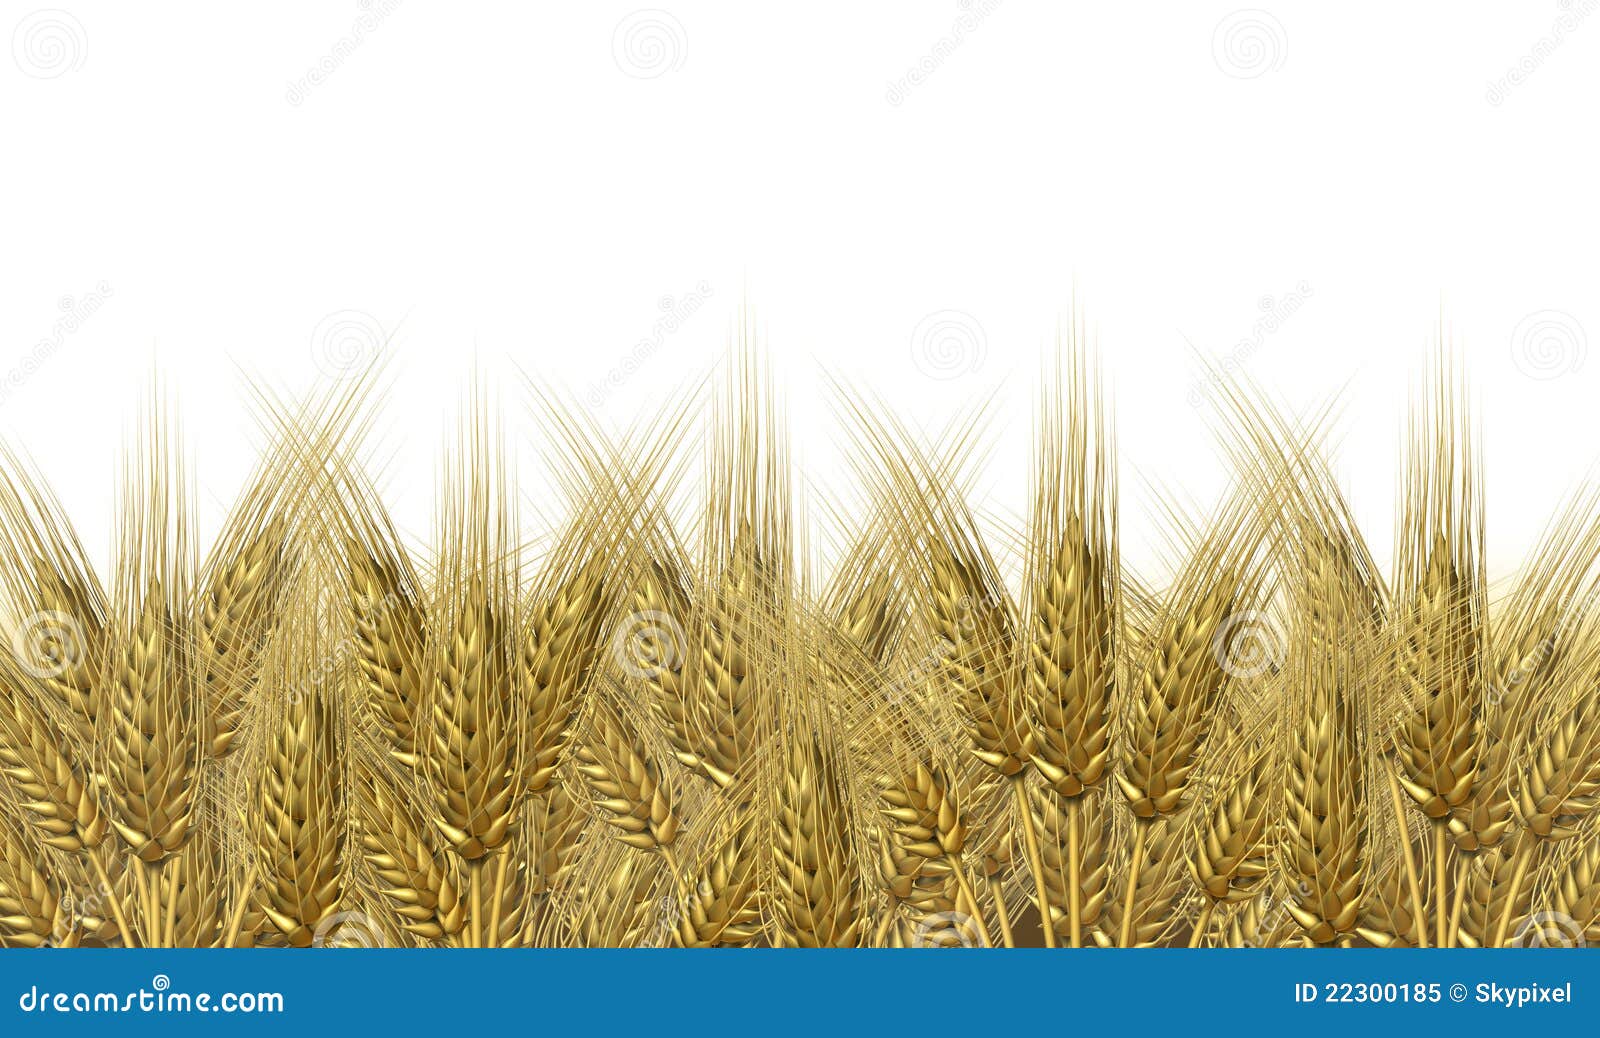 Wheat harvest horizon. Wheat harvest on a golden horizon of harvesting grass crop as a symbol of healthy whole food for farm baked and fresh organic bakery goods as bread and cerial grains.